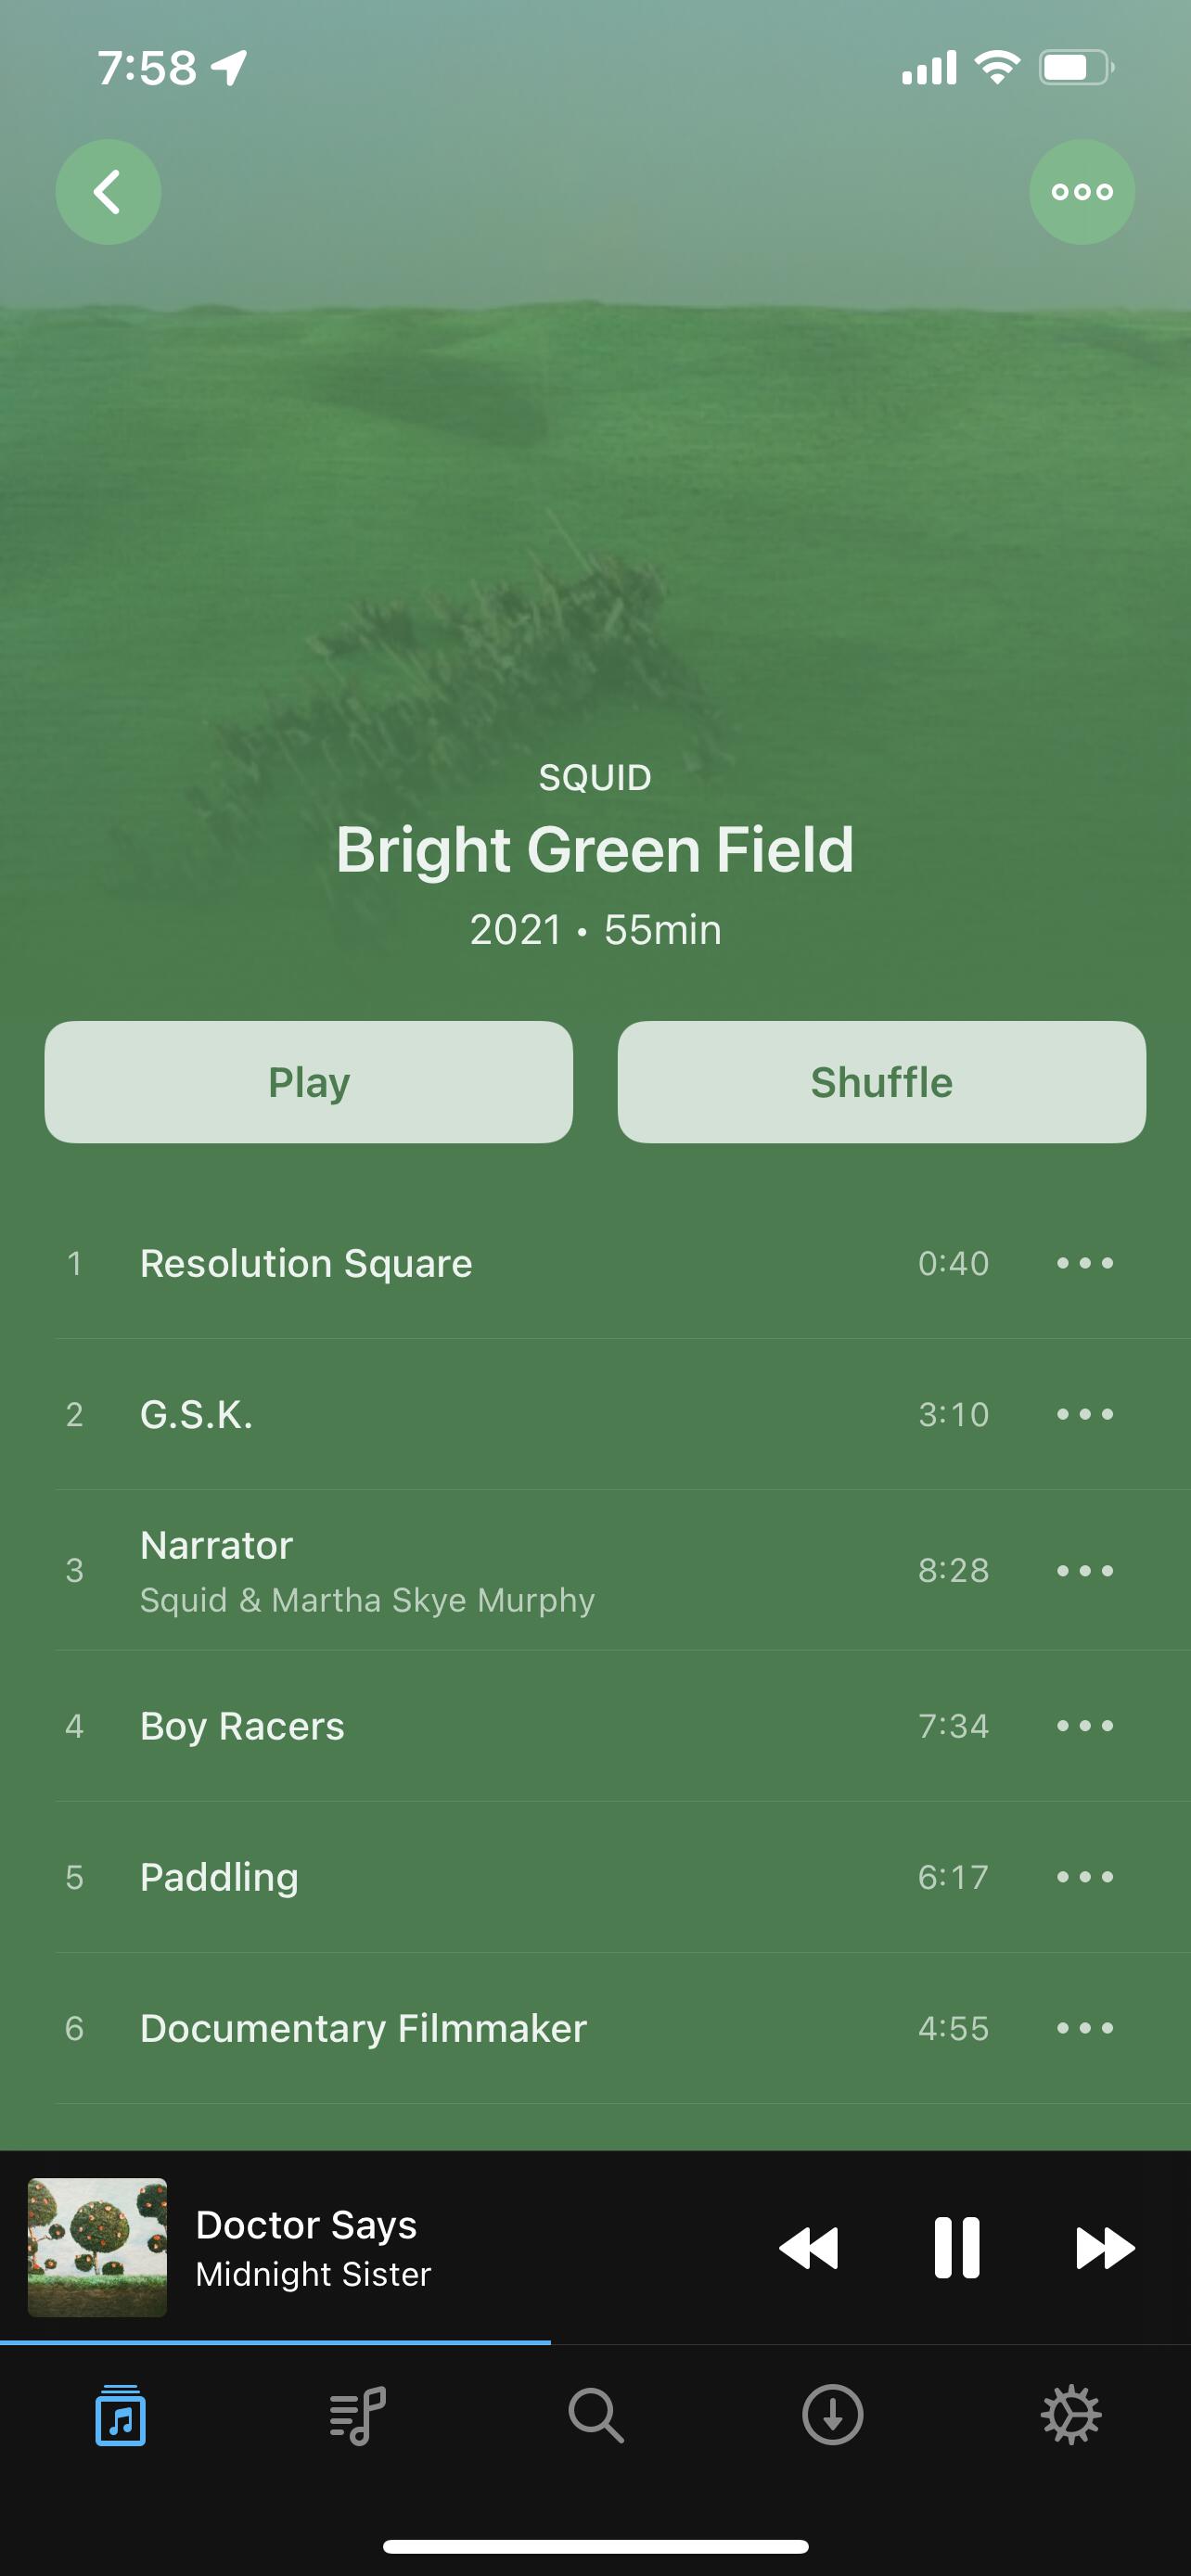 Image of the album view with a predominantly green record